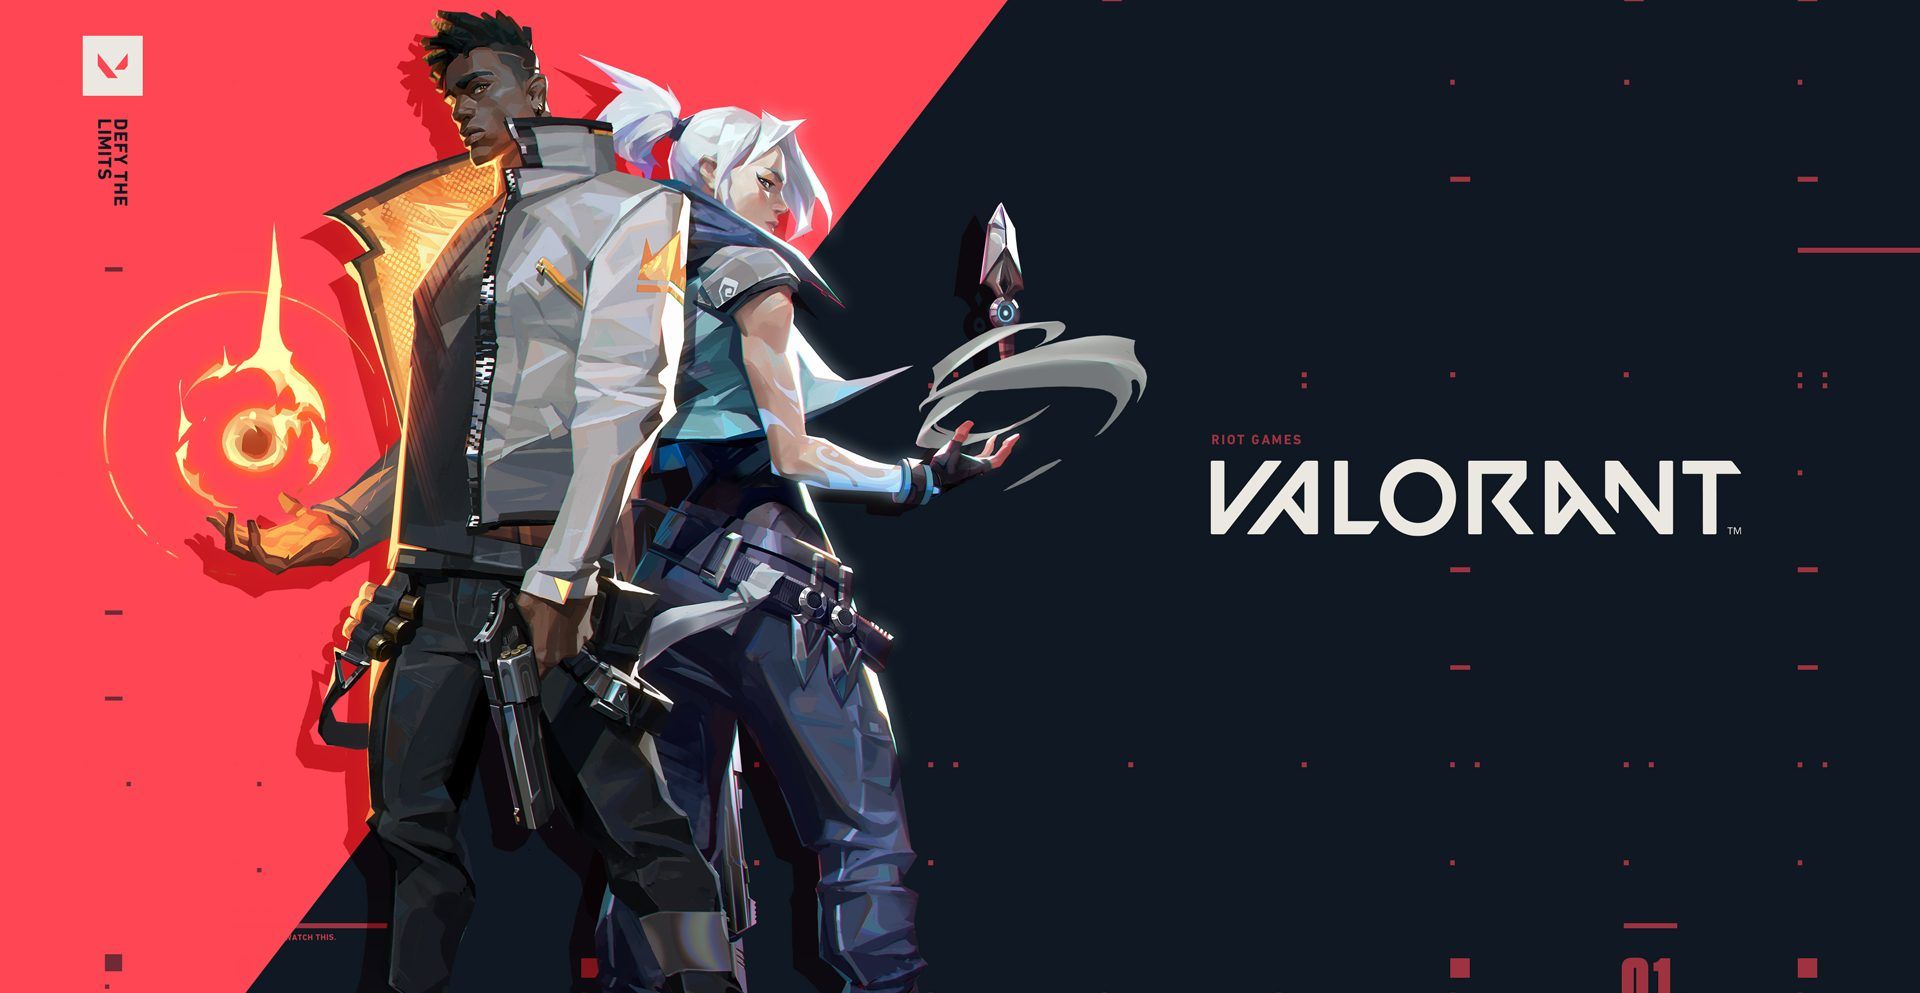 Valorant cover image with two characters